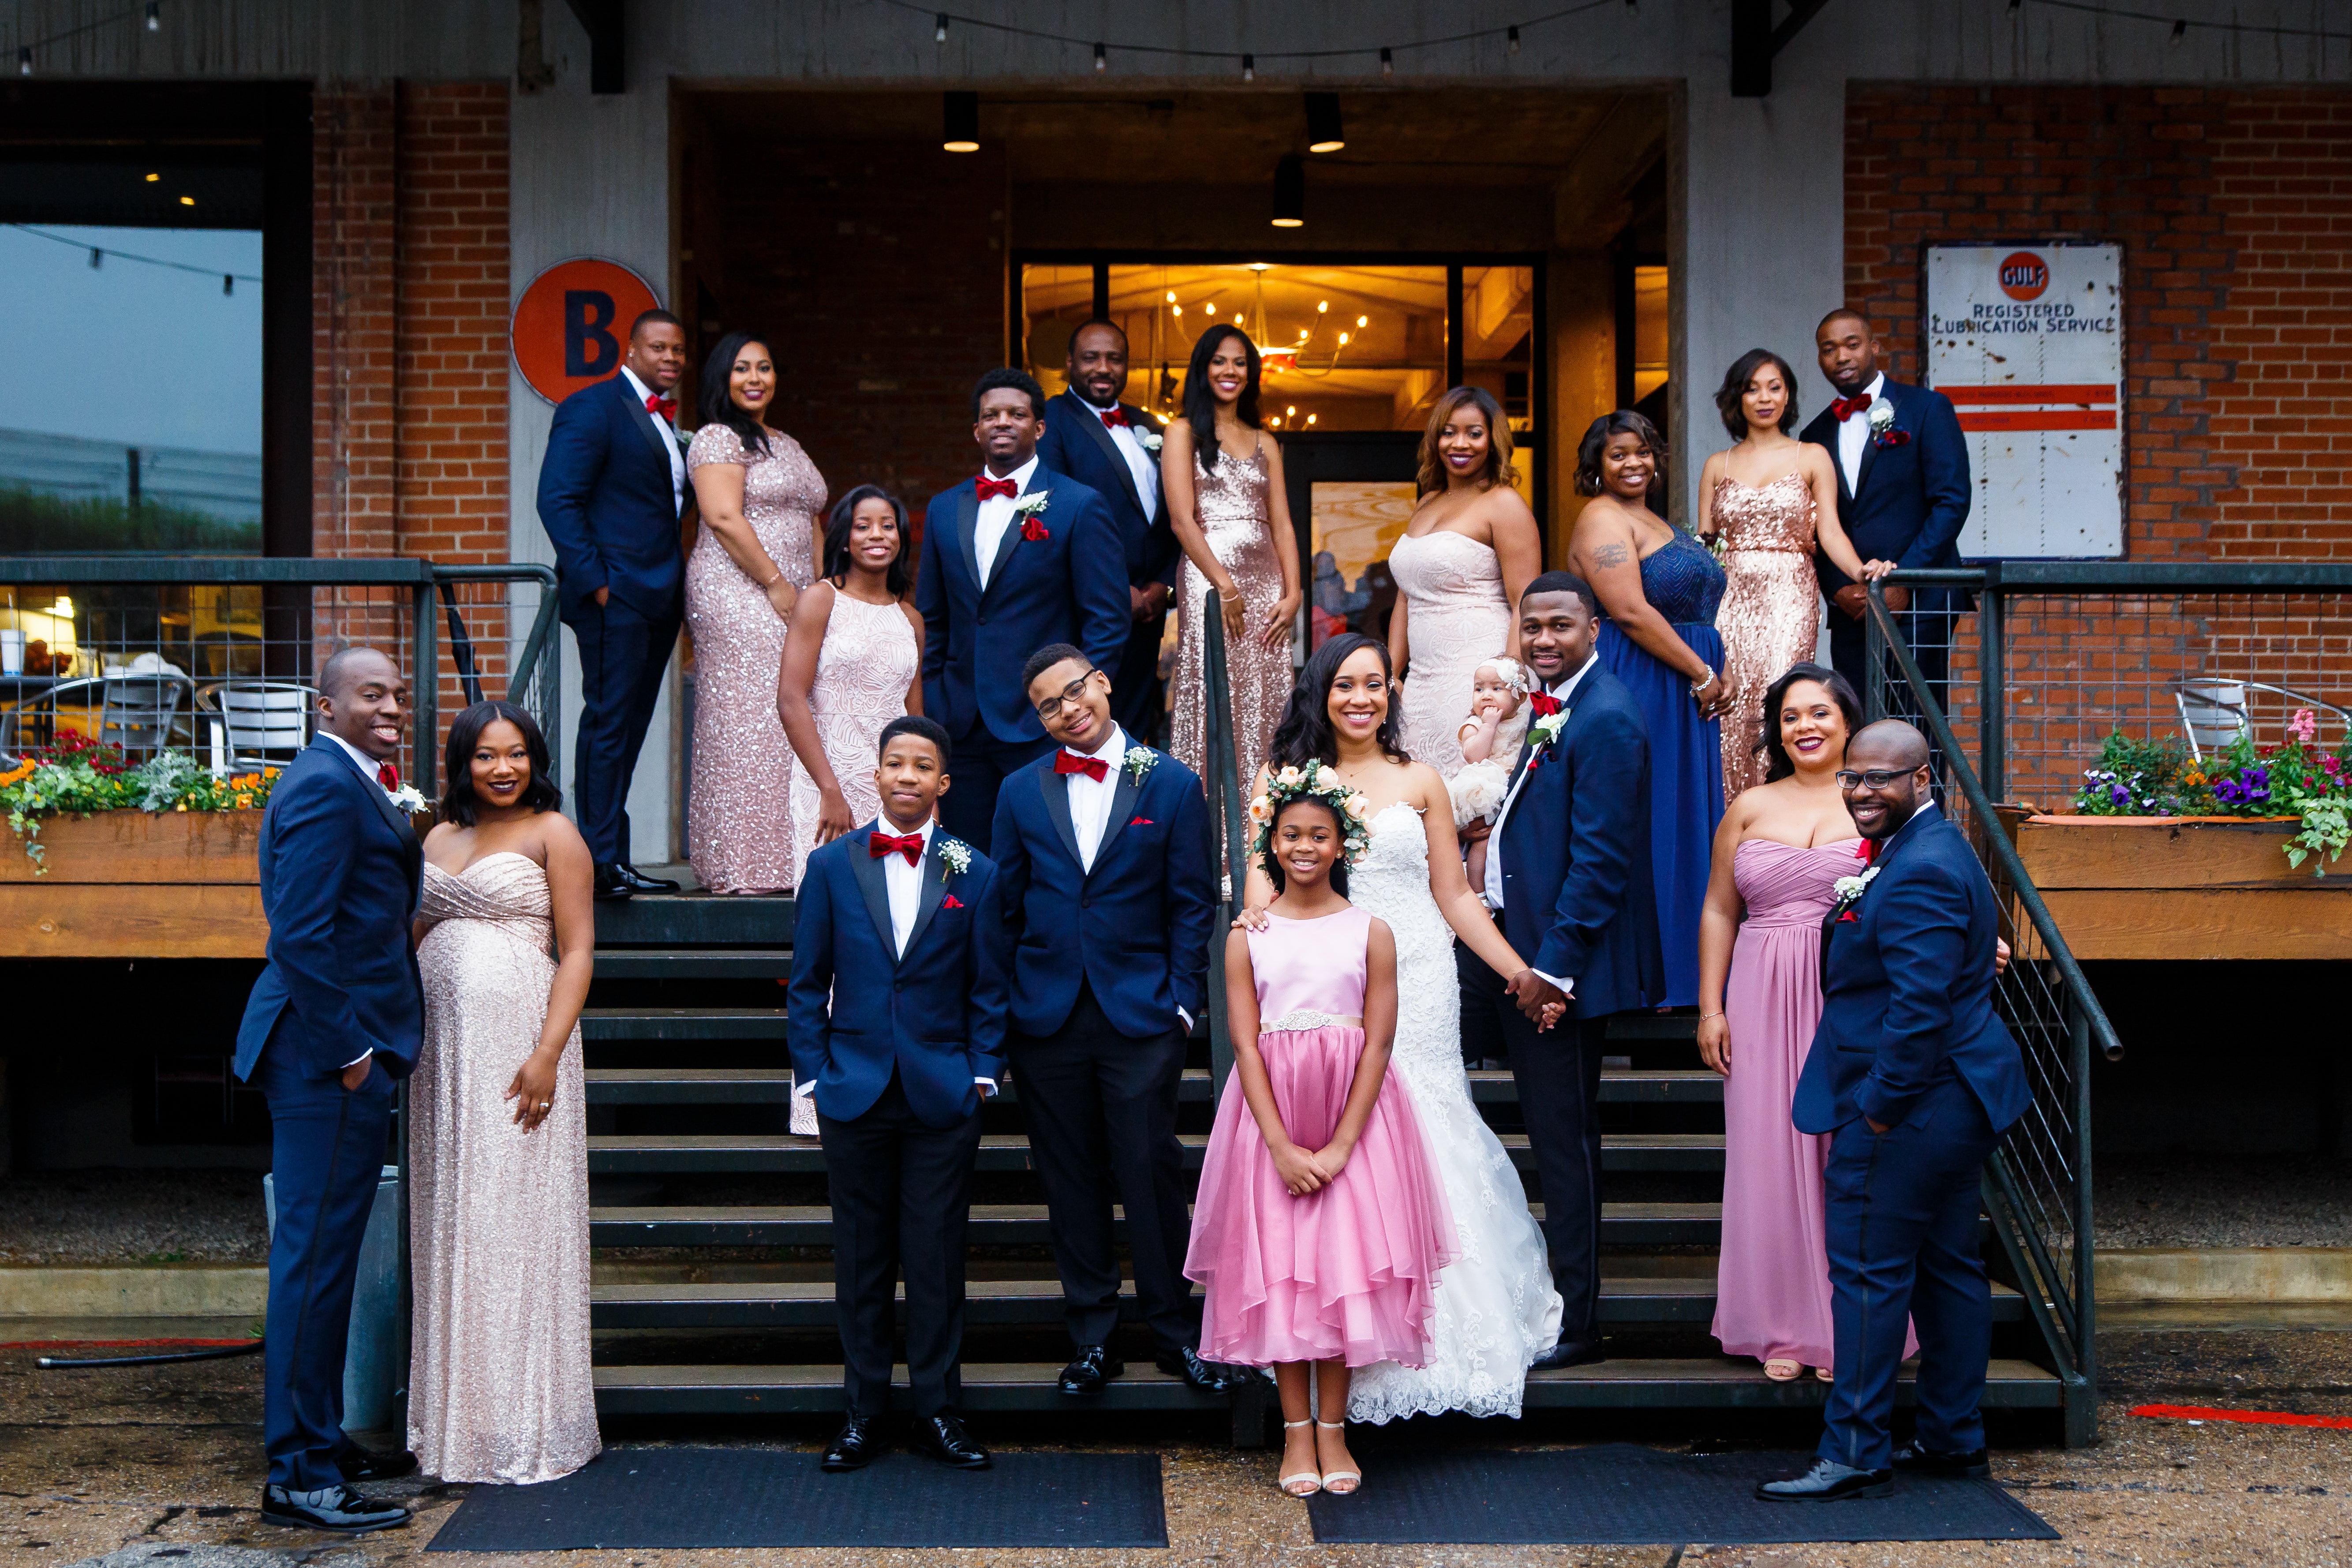 Bridal Bliss: Donald And Aarika's Texas Wedding Was Every Bit Romantic And Chic
